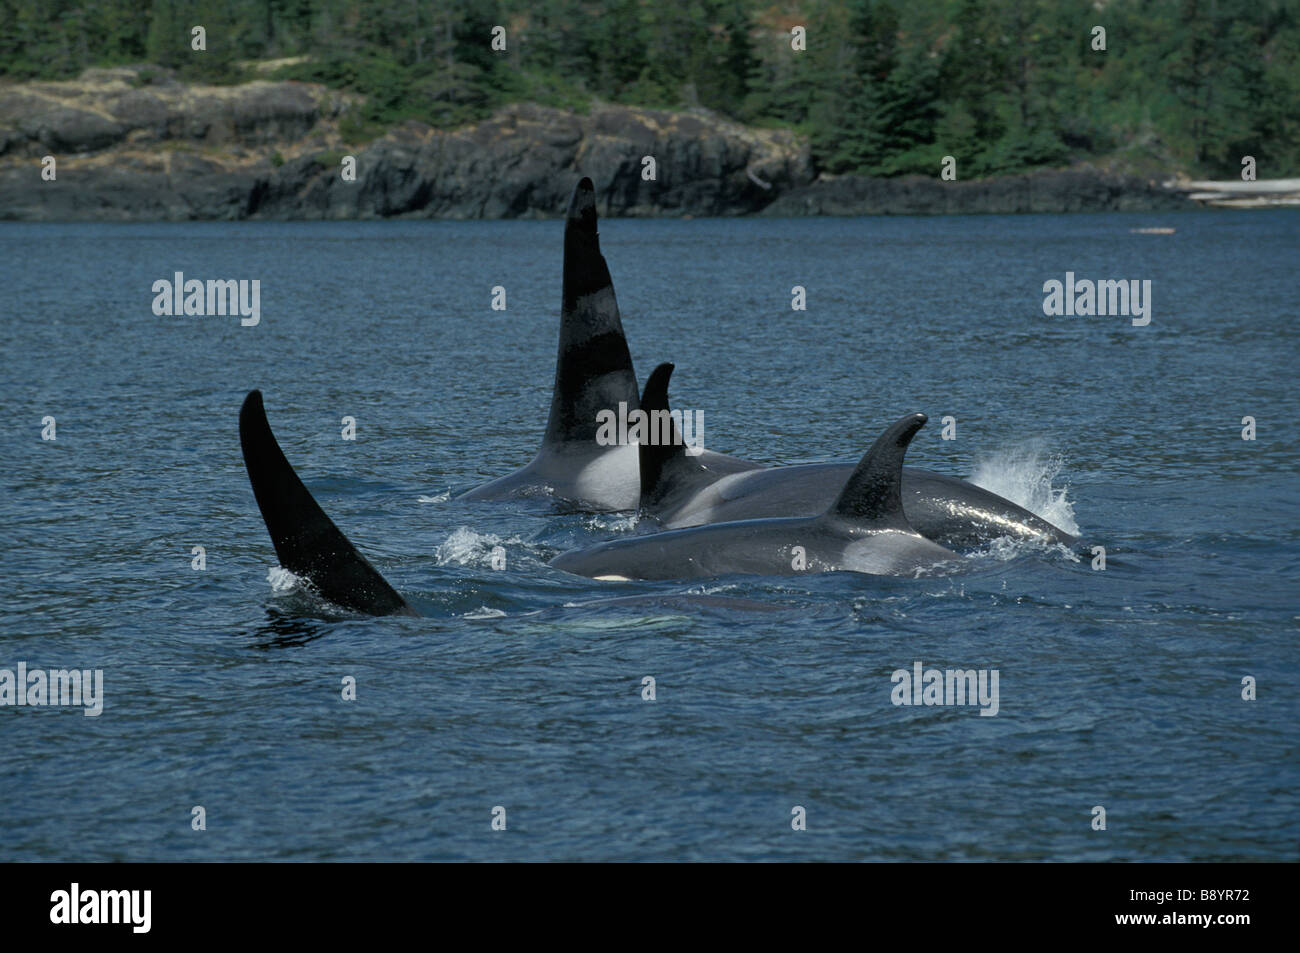 orque ENDANGERED SPECIES CANADA British Columbia Orca of Killer Whale rising from the water Action Actions Alone Antarctic speci Stock Photo